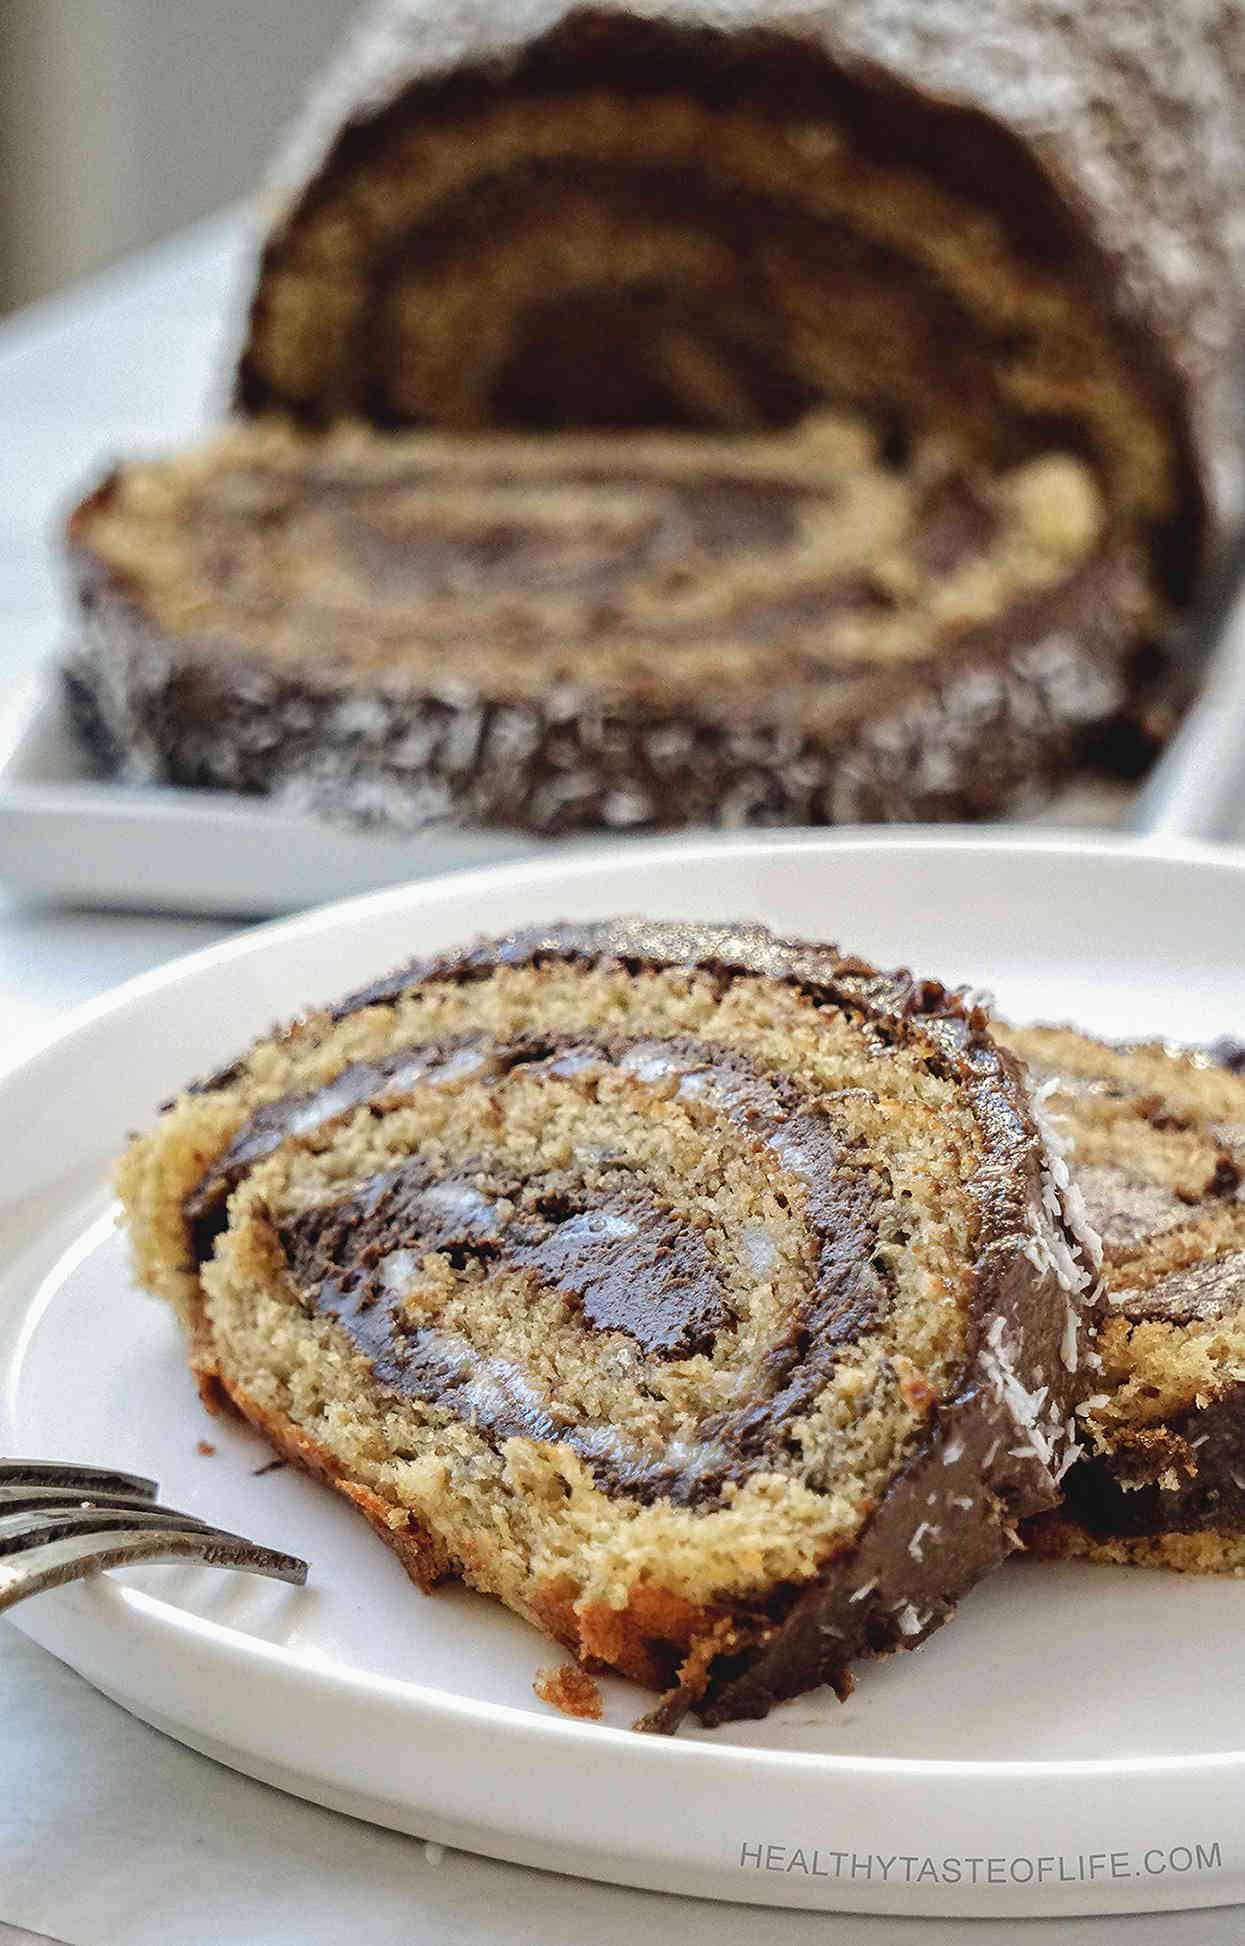 Gluten free Paleo Swiss roll - a delicious gluten and dairy free dessert that is also refined sugar free, grain free, paleo and kid friendly. 